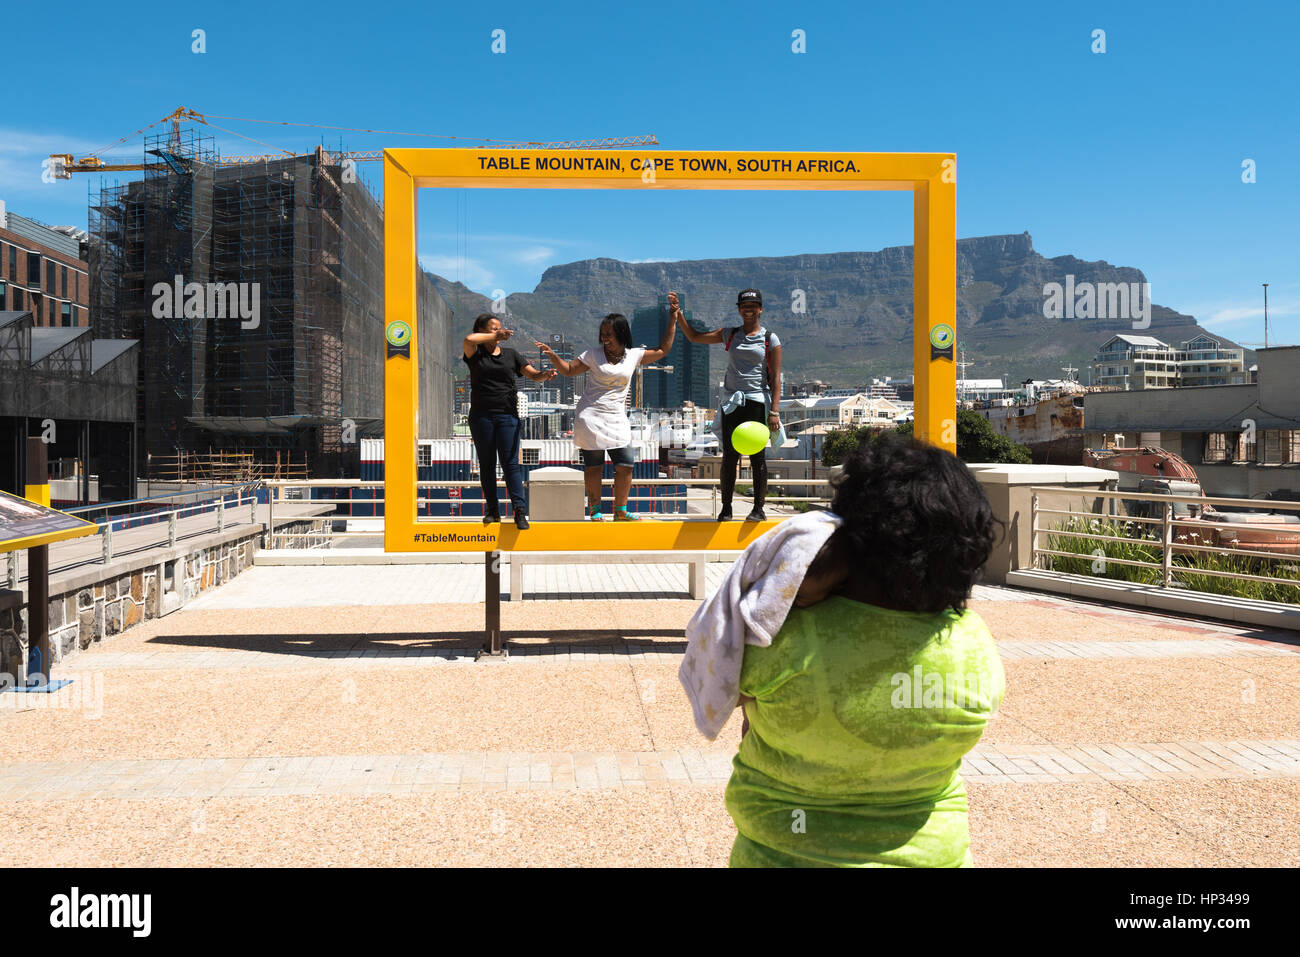 Cape Town, South Africa - December 1, 2016: People are having fun and are posing at the Table Mountain photo spot at the famous V&A Waterfront in Cape Stock Photo